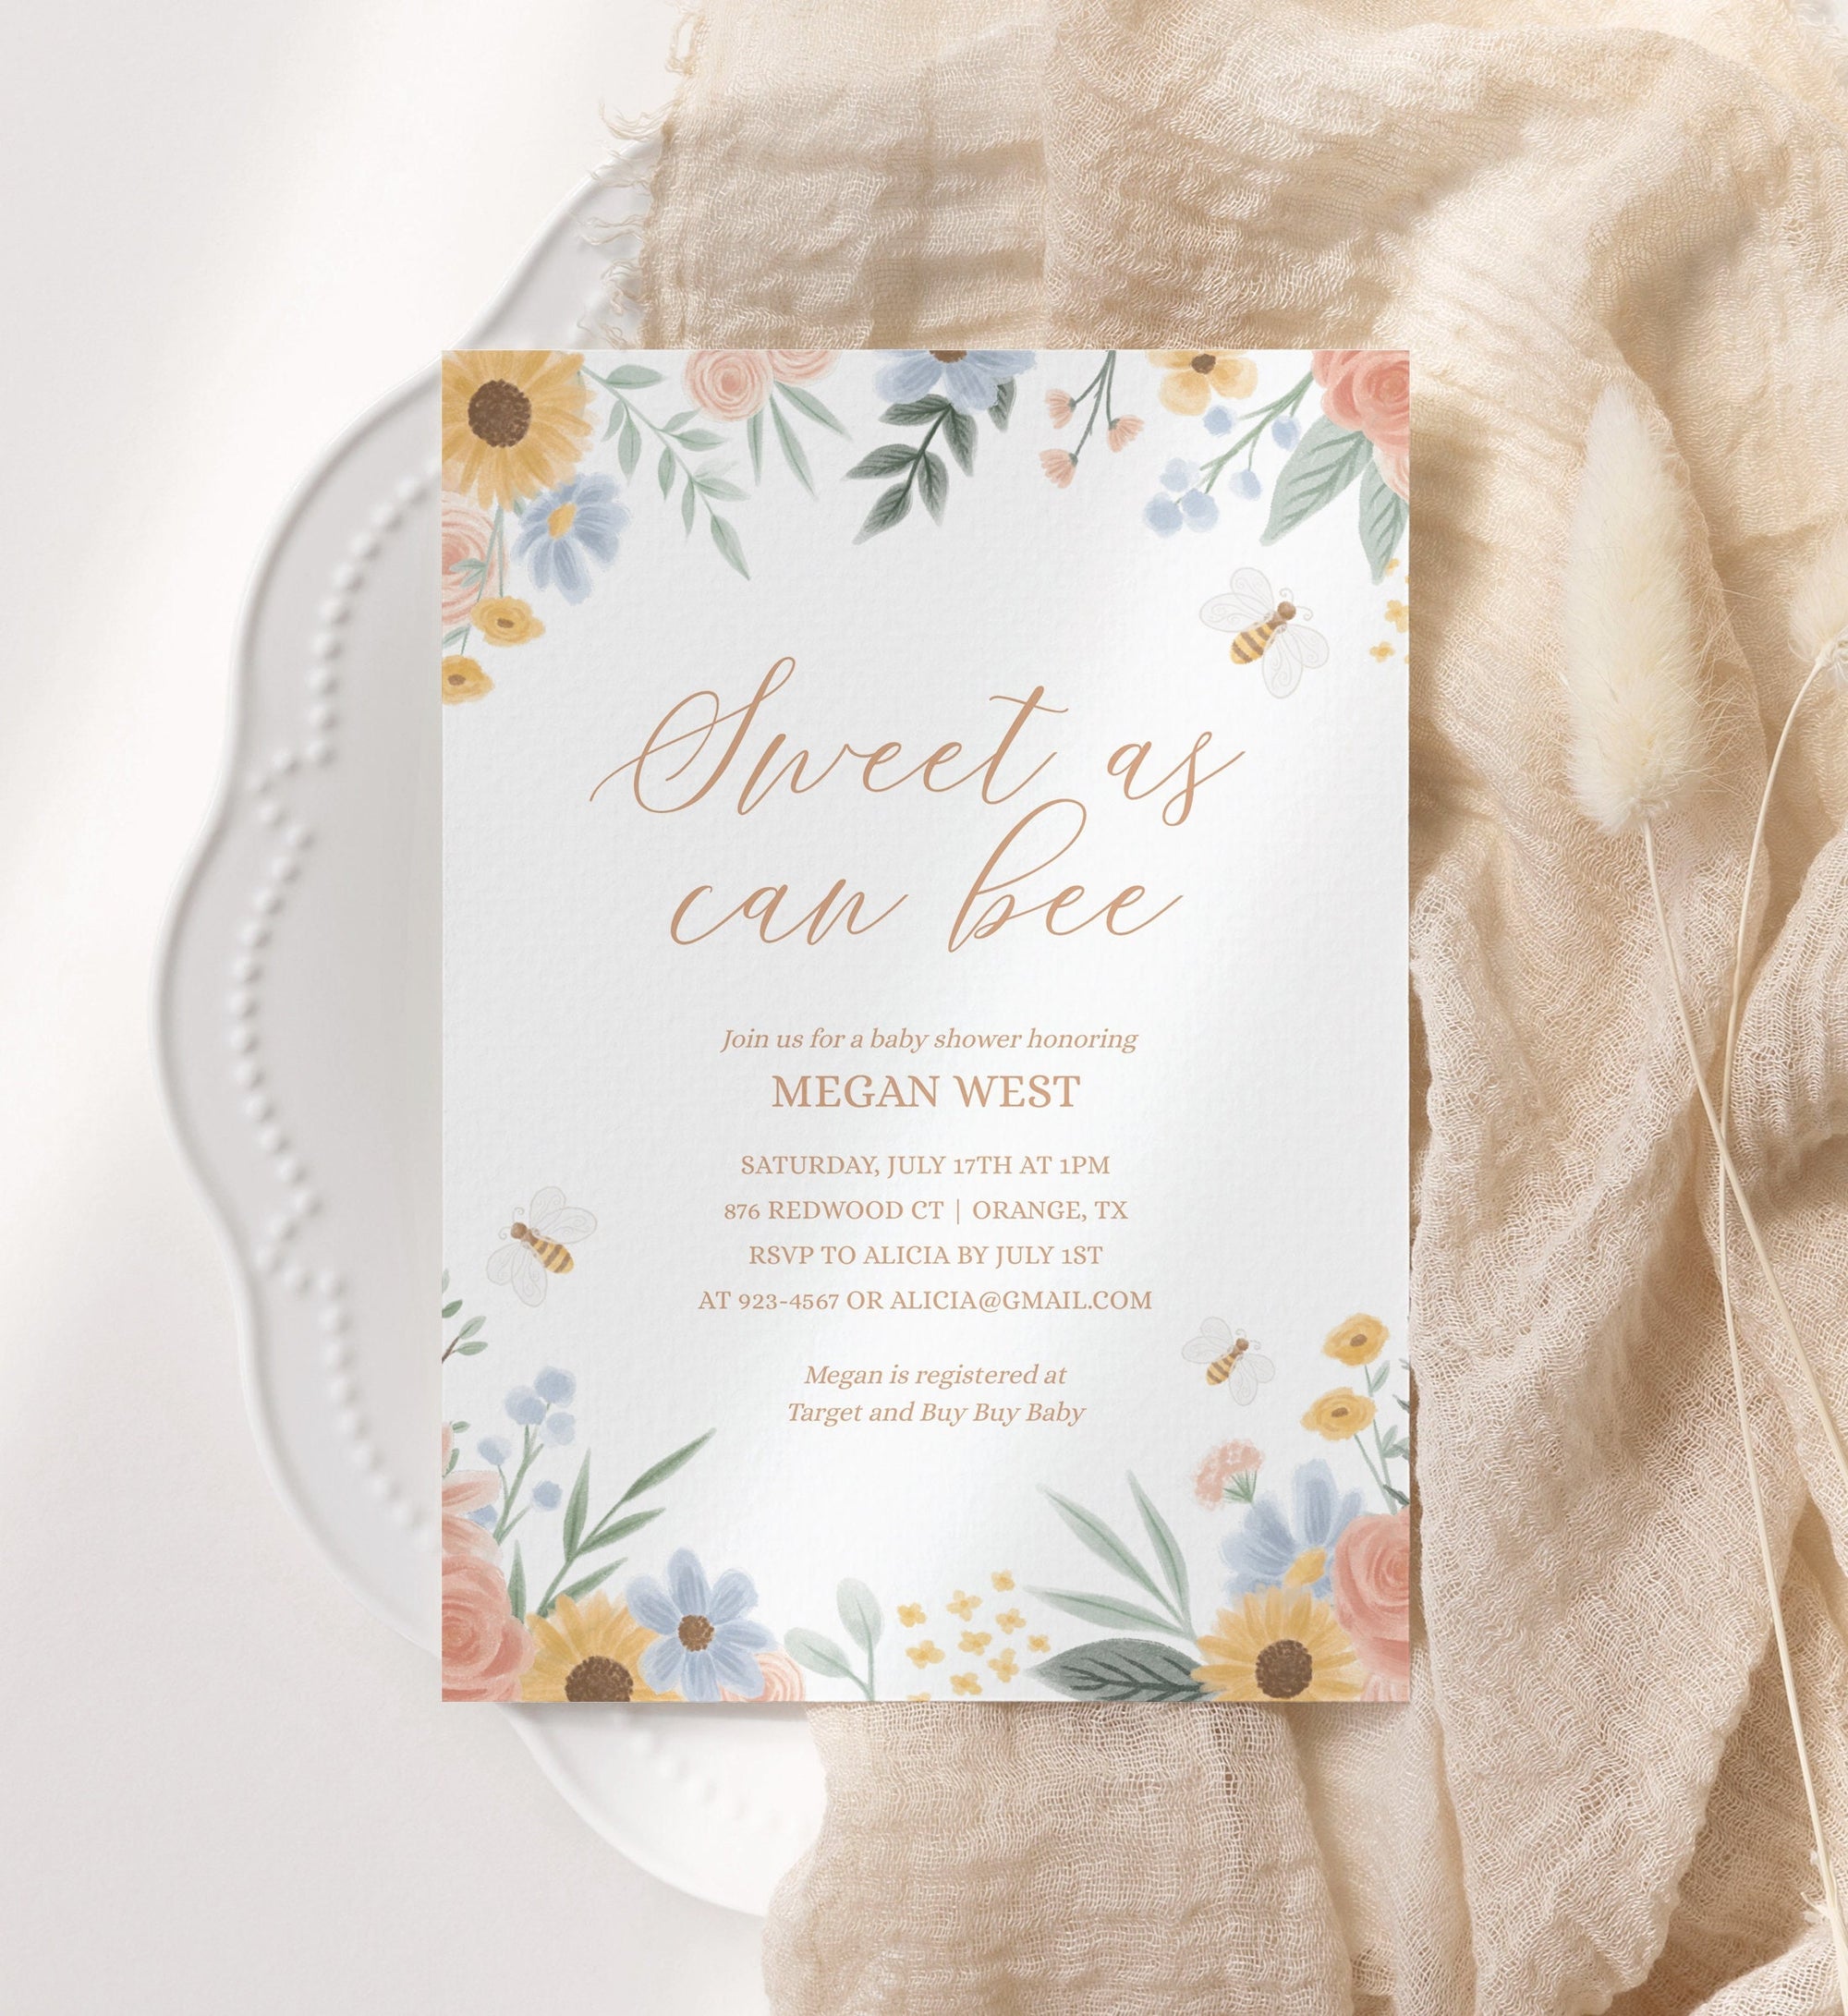 Sweet as Can Bee Baby Shower Invitation, Bee Baby Shower Invite, Printable Invitation Template, Floral Girl Baby Shower, DIGITAL DOWNLOAD